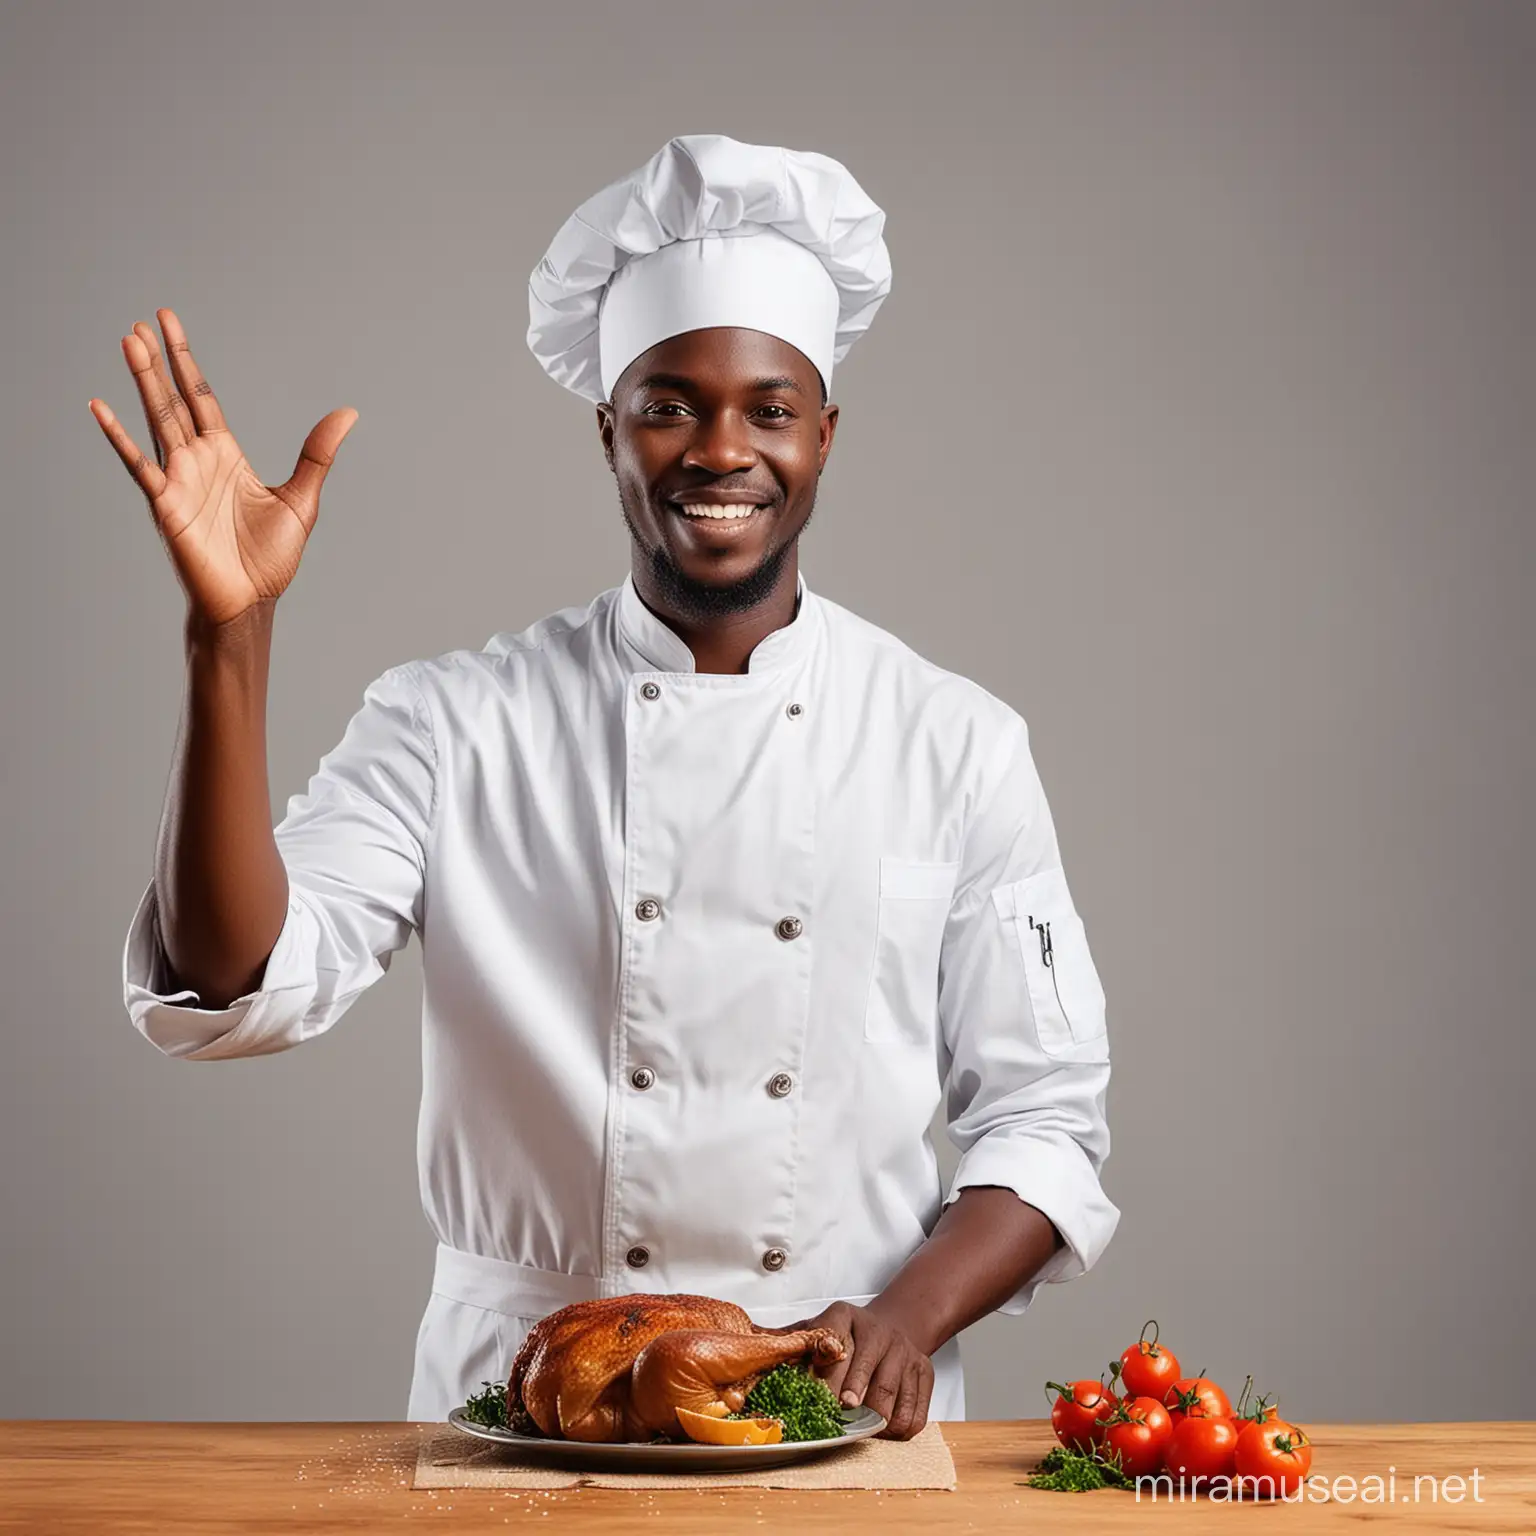 African chef with open stretched hand